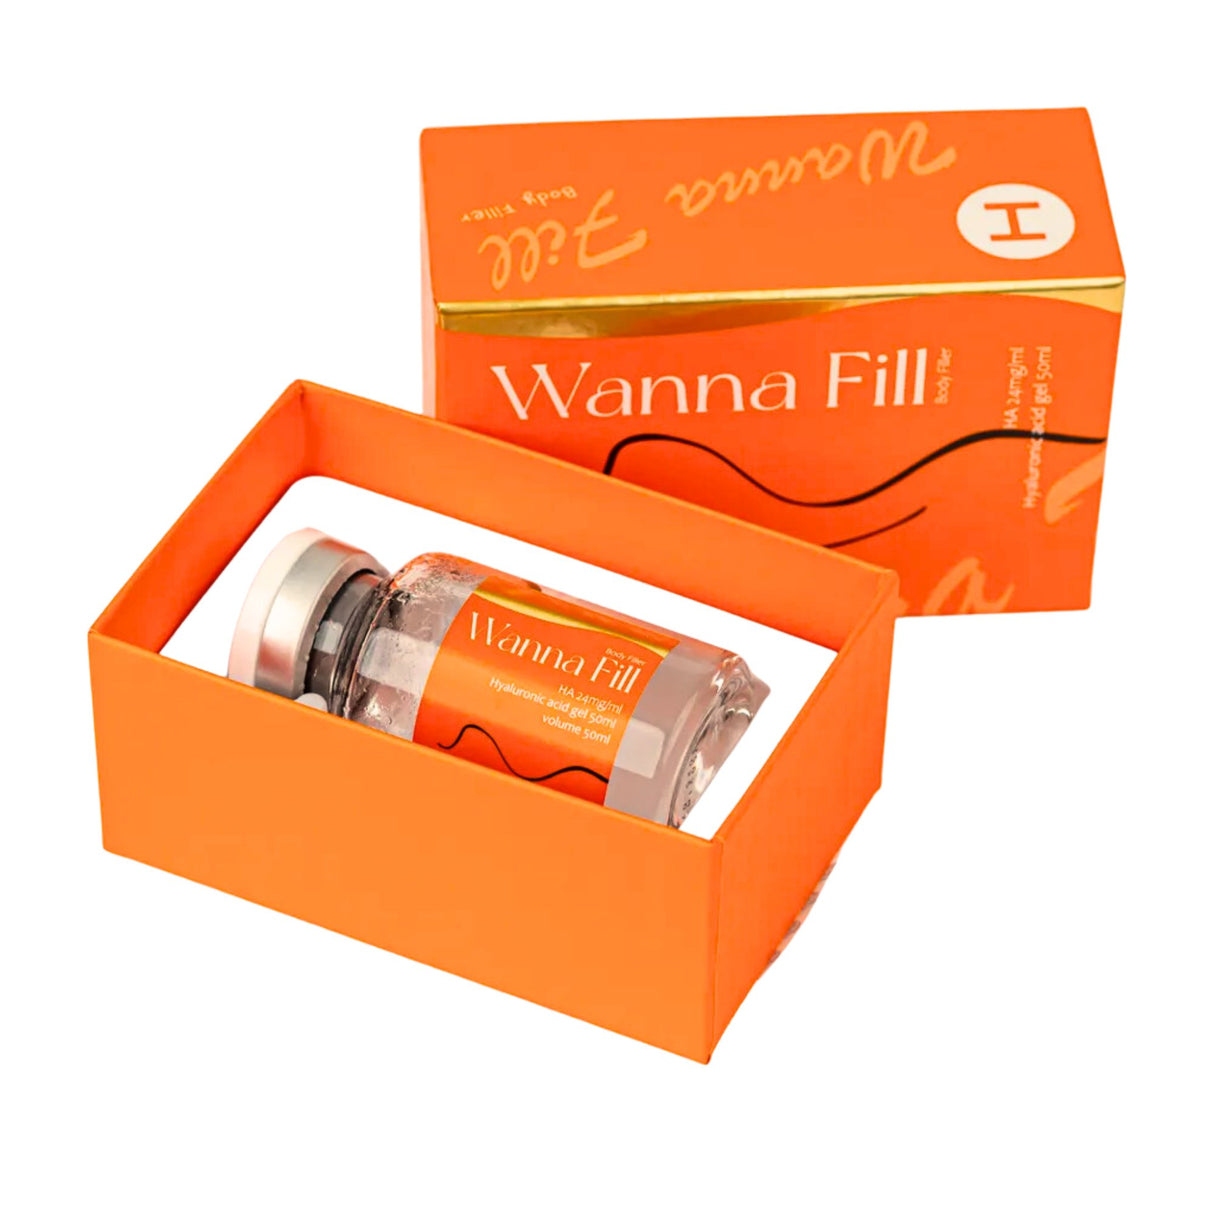 Wanna Fill - Filler Lux™ - DERMAL FILLERS - Pharma Research Products Co., Ltd.